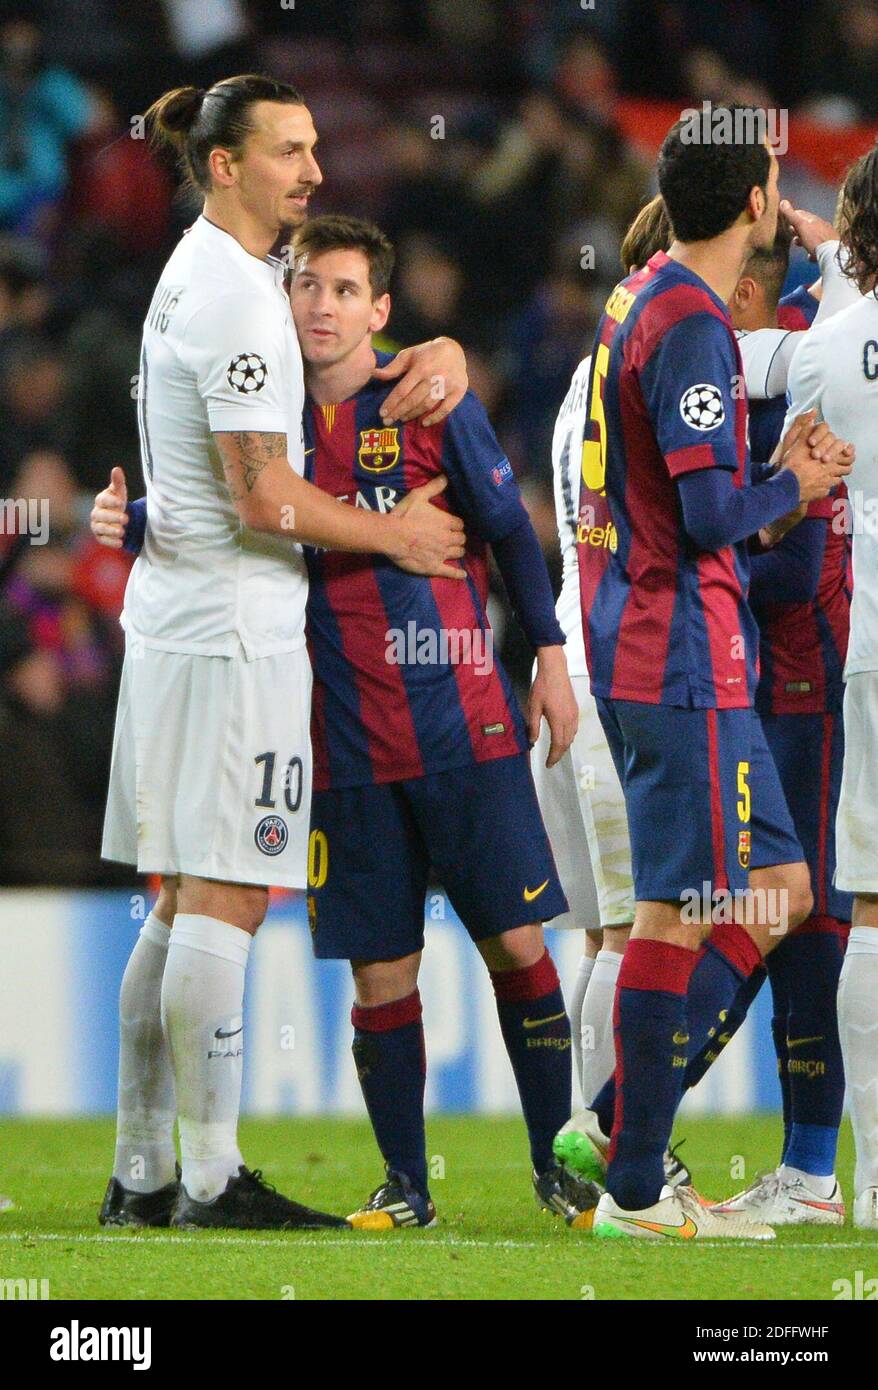 File photo - PSG's Zlatan Ibrahimovic with Barcelona's Lionel Messi during  the UEFA Champions League soccer match, FC Barcelona Vs Paris Saint-Germain  at Camp Nou in Barcelone, Spain on December 10, 20114.